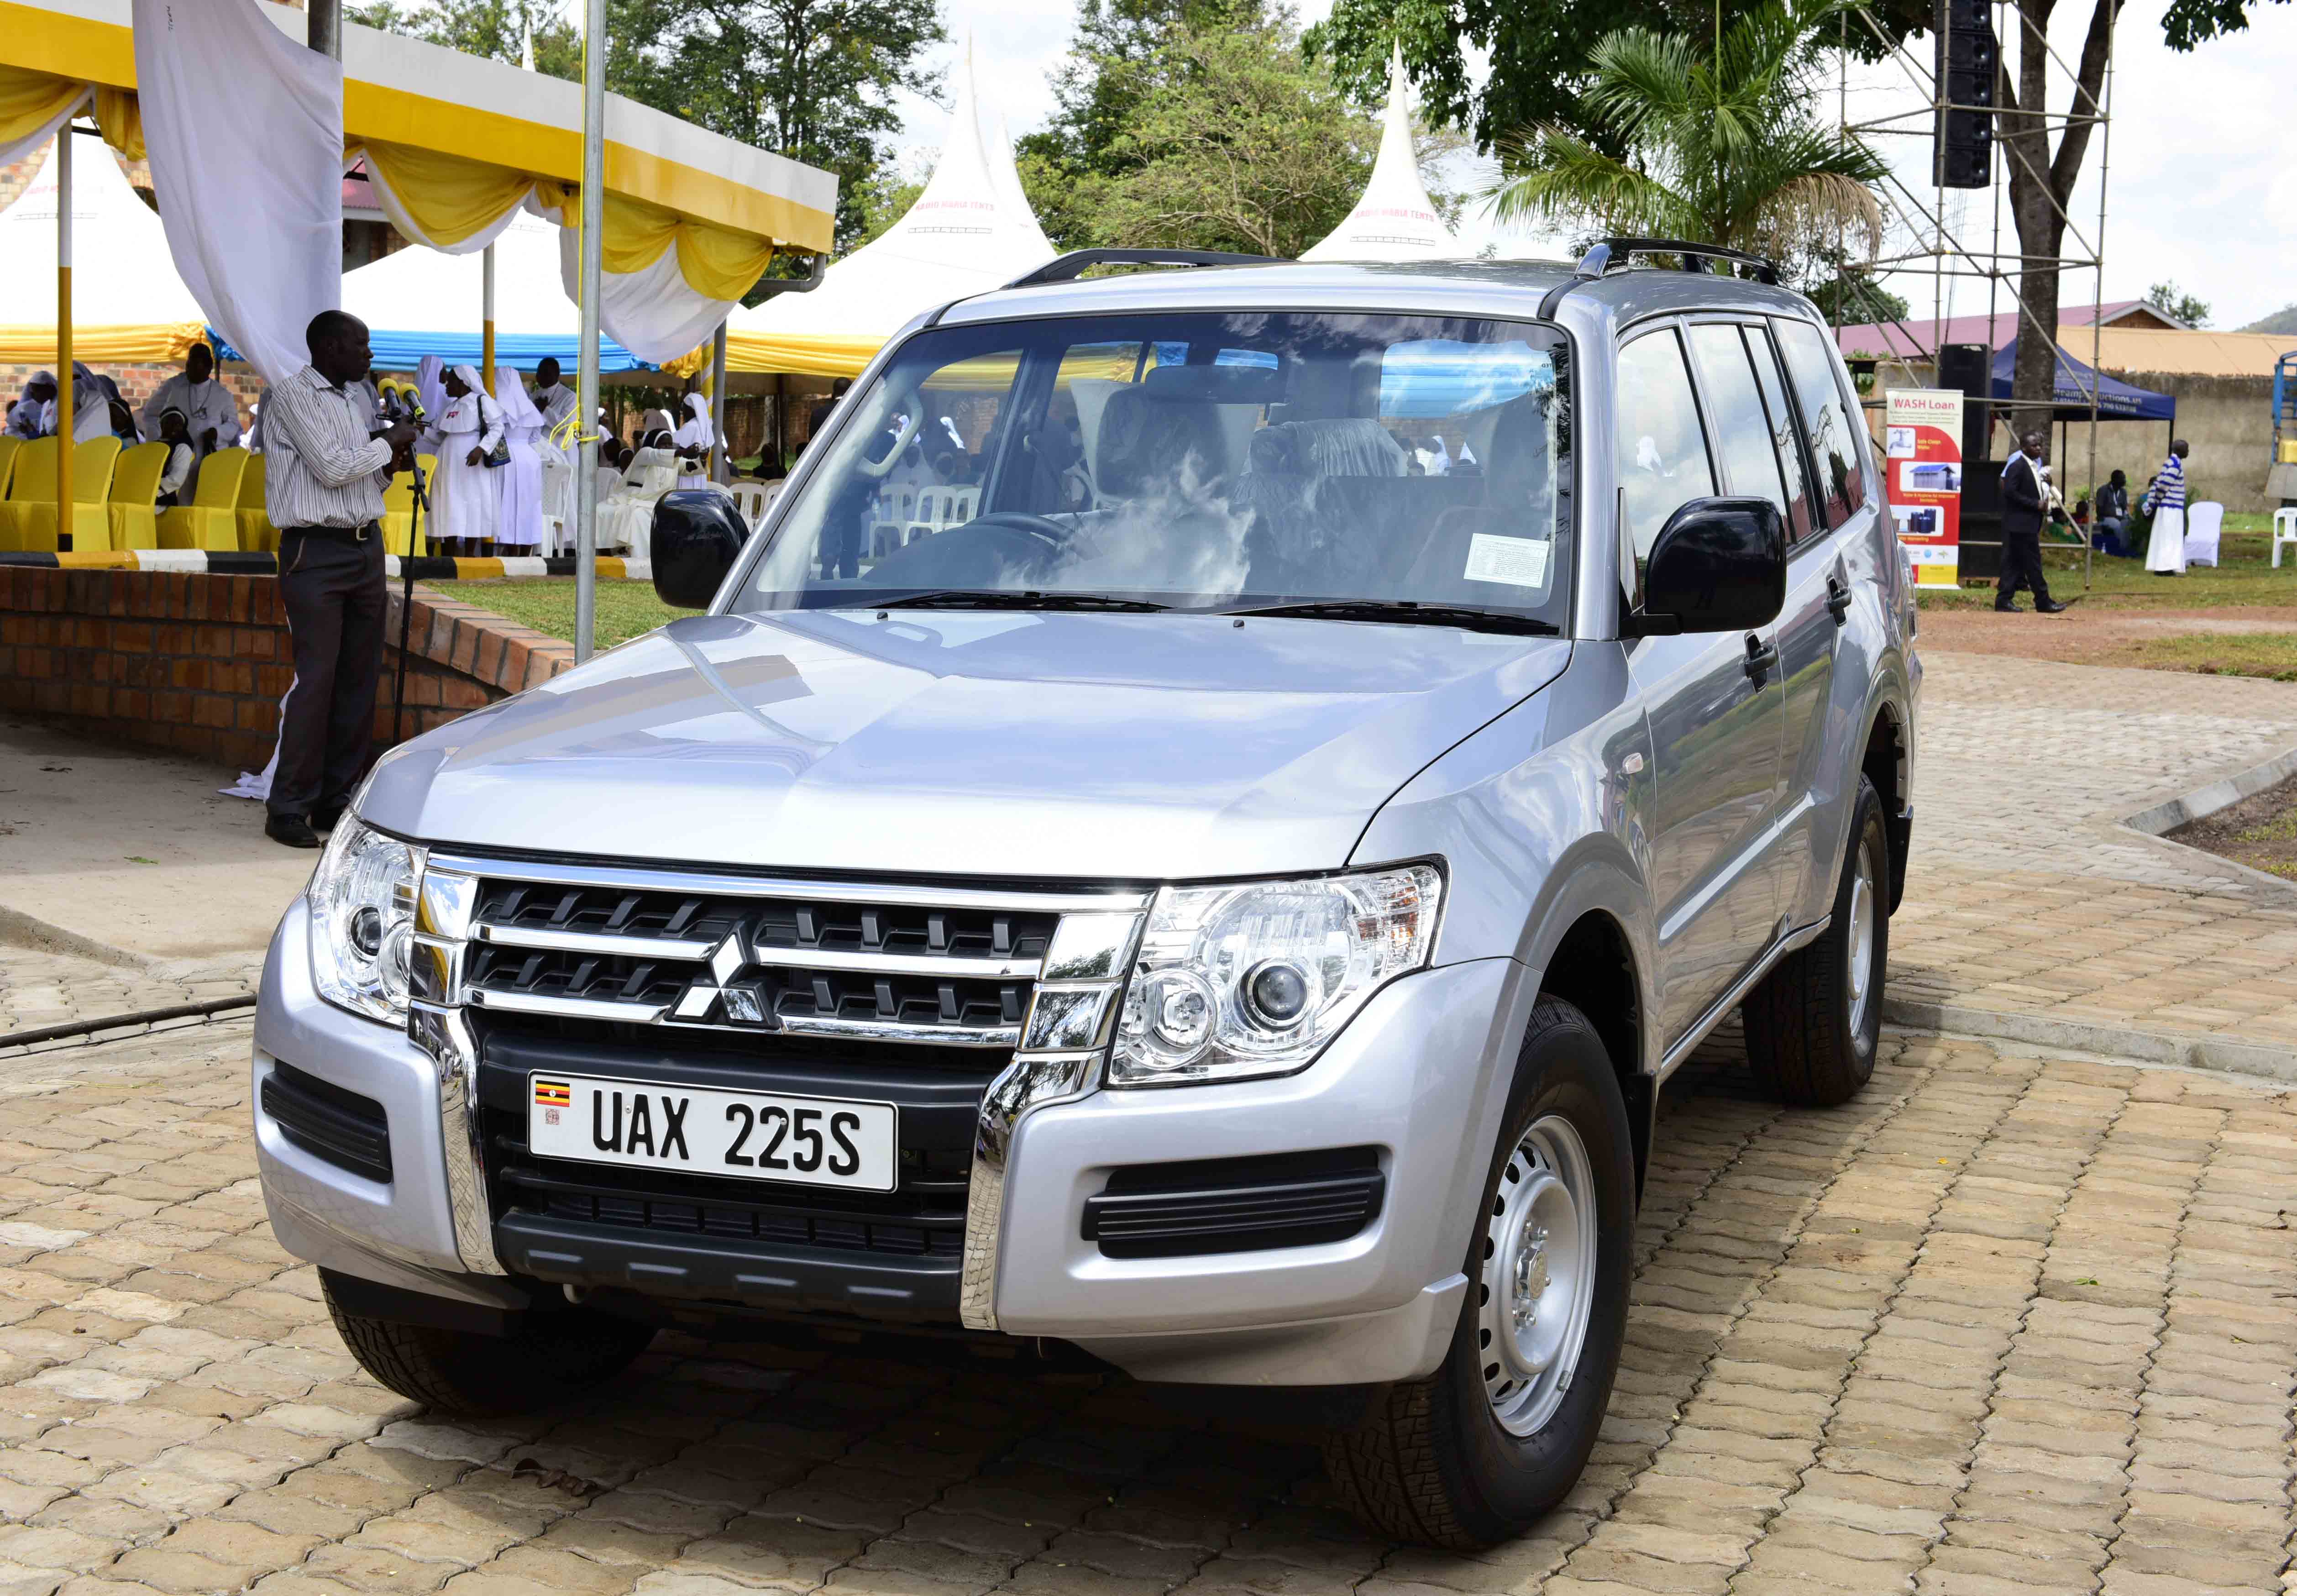 The new Pajero donated to the Bishop-elect Vincent Kirabo